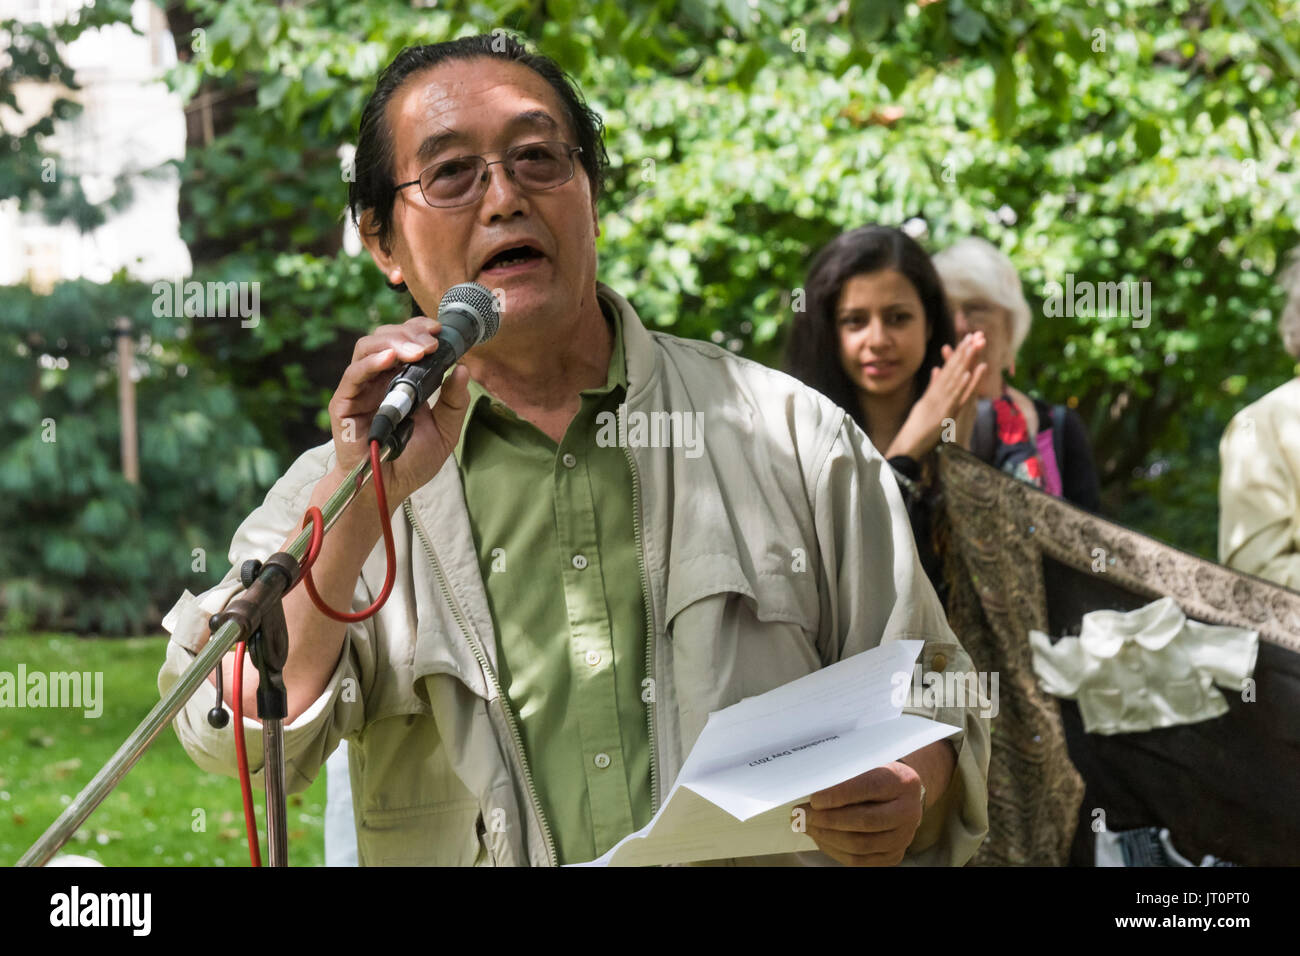 London, UK. 6th Aug, 2017. London, UK. 6th August 2017. A Japanese man speaks about the Fukushima disaster at the London CND ceremony in memory of the victims, past and present on the 72nd anniversary of the dropping of the atomic bomb on Hiroshima and the second atomic bomb dropped on Nagasaki three days later. He organises a regular Friday portest about FUkushima at the Japanese embassy and TEPCO offices. After a number of speeches and performances there was a minute's silence during which the Deputy Mayor of Camden and others laid flowers around the commemorative cherry tree. Peter Marsh Stock Photo